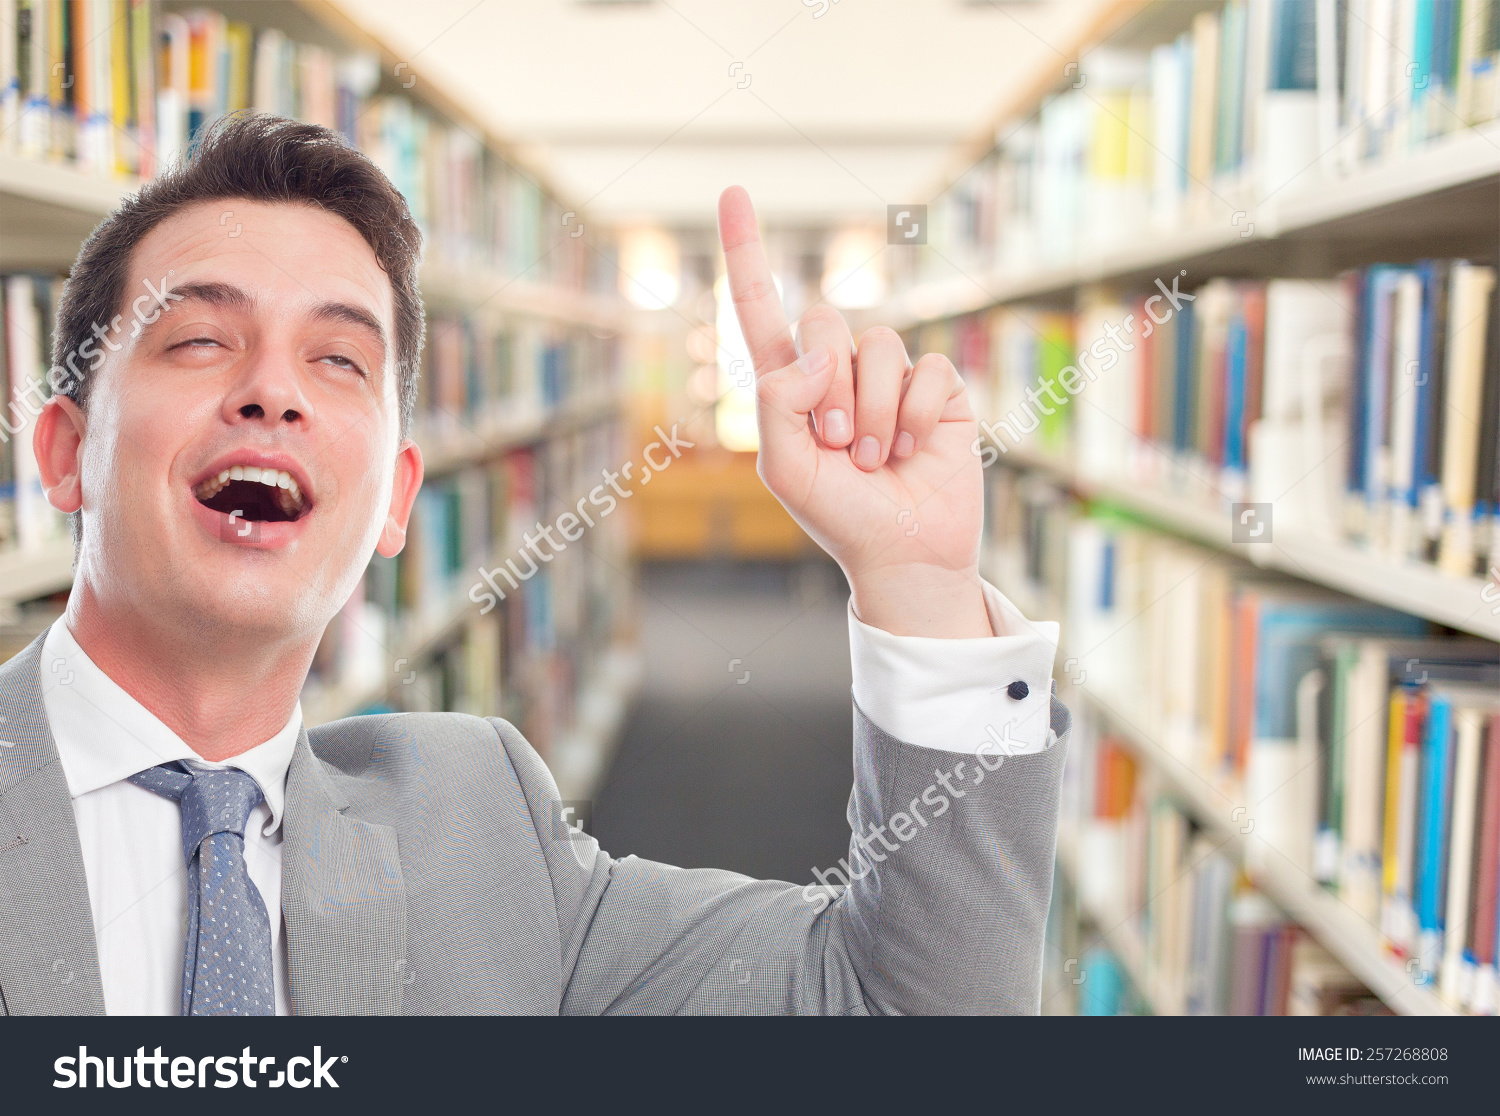 stock-photo-business-man-with-grey-suit-he-is-looking-funny-over-library-background-257268808